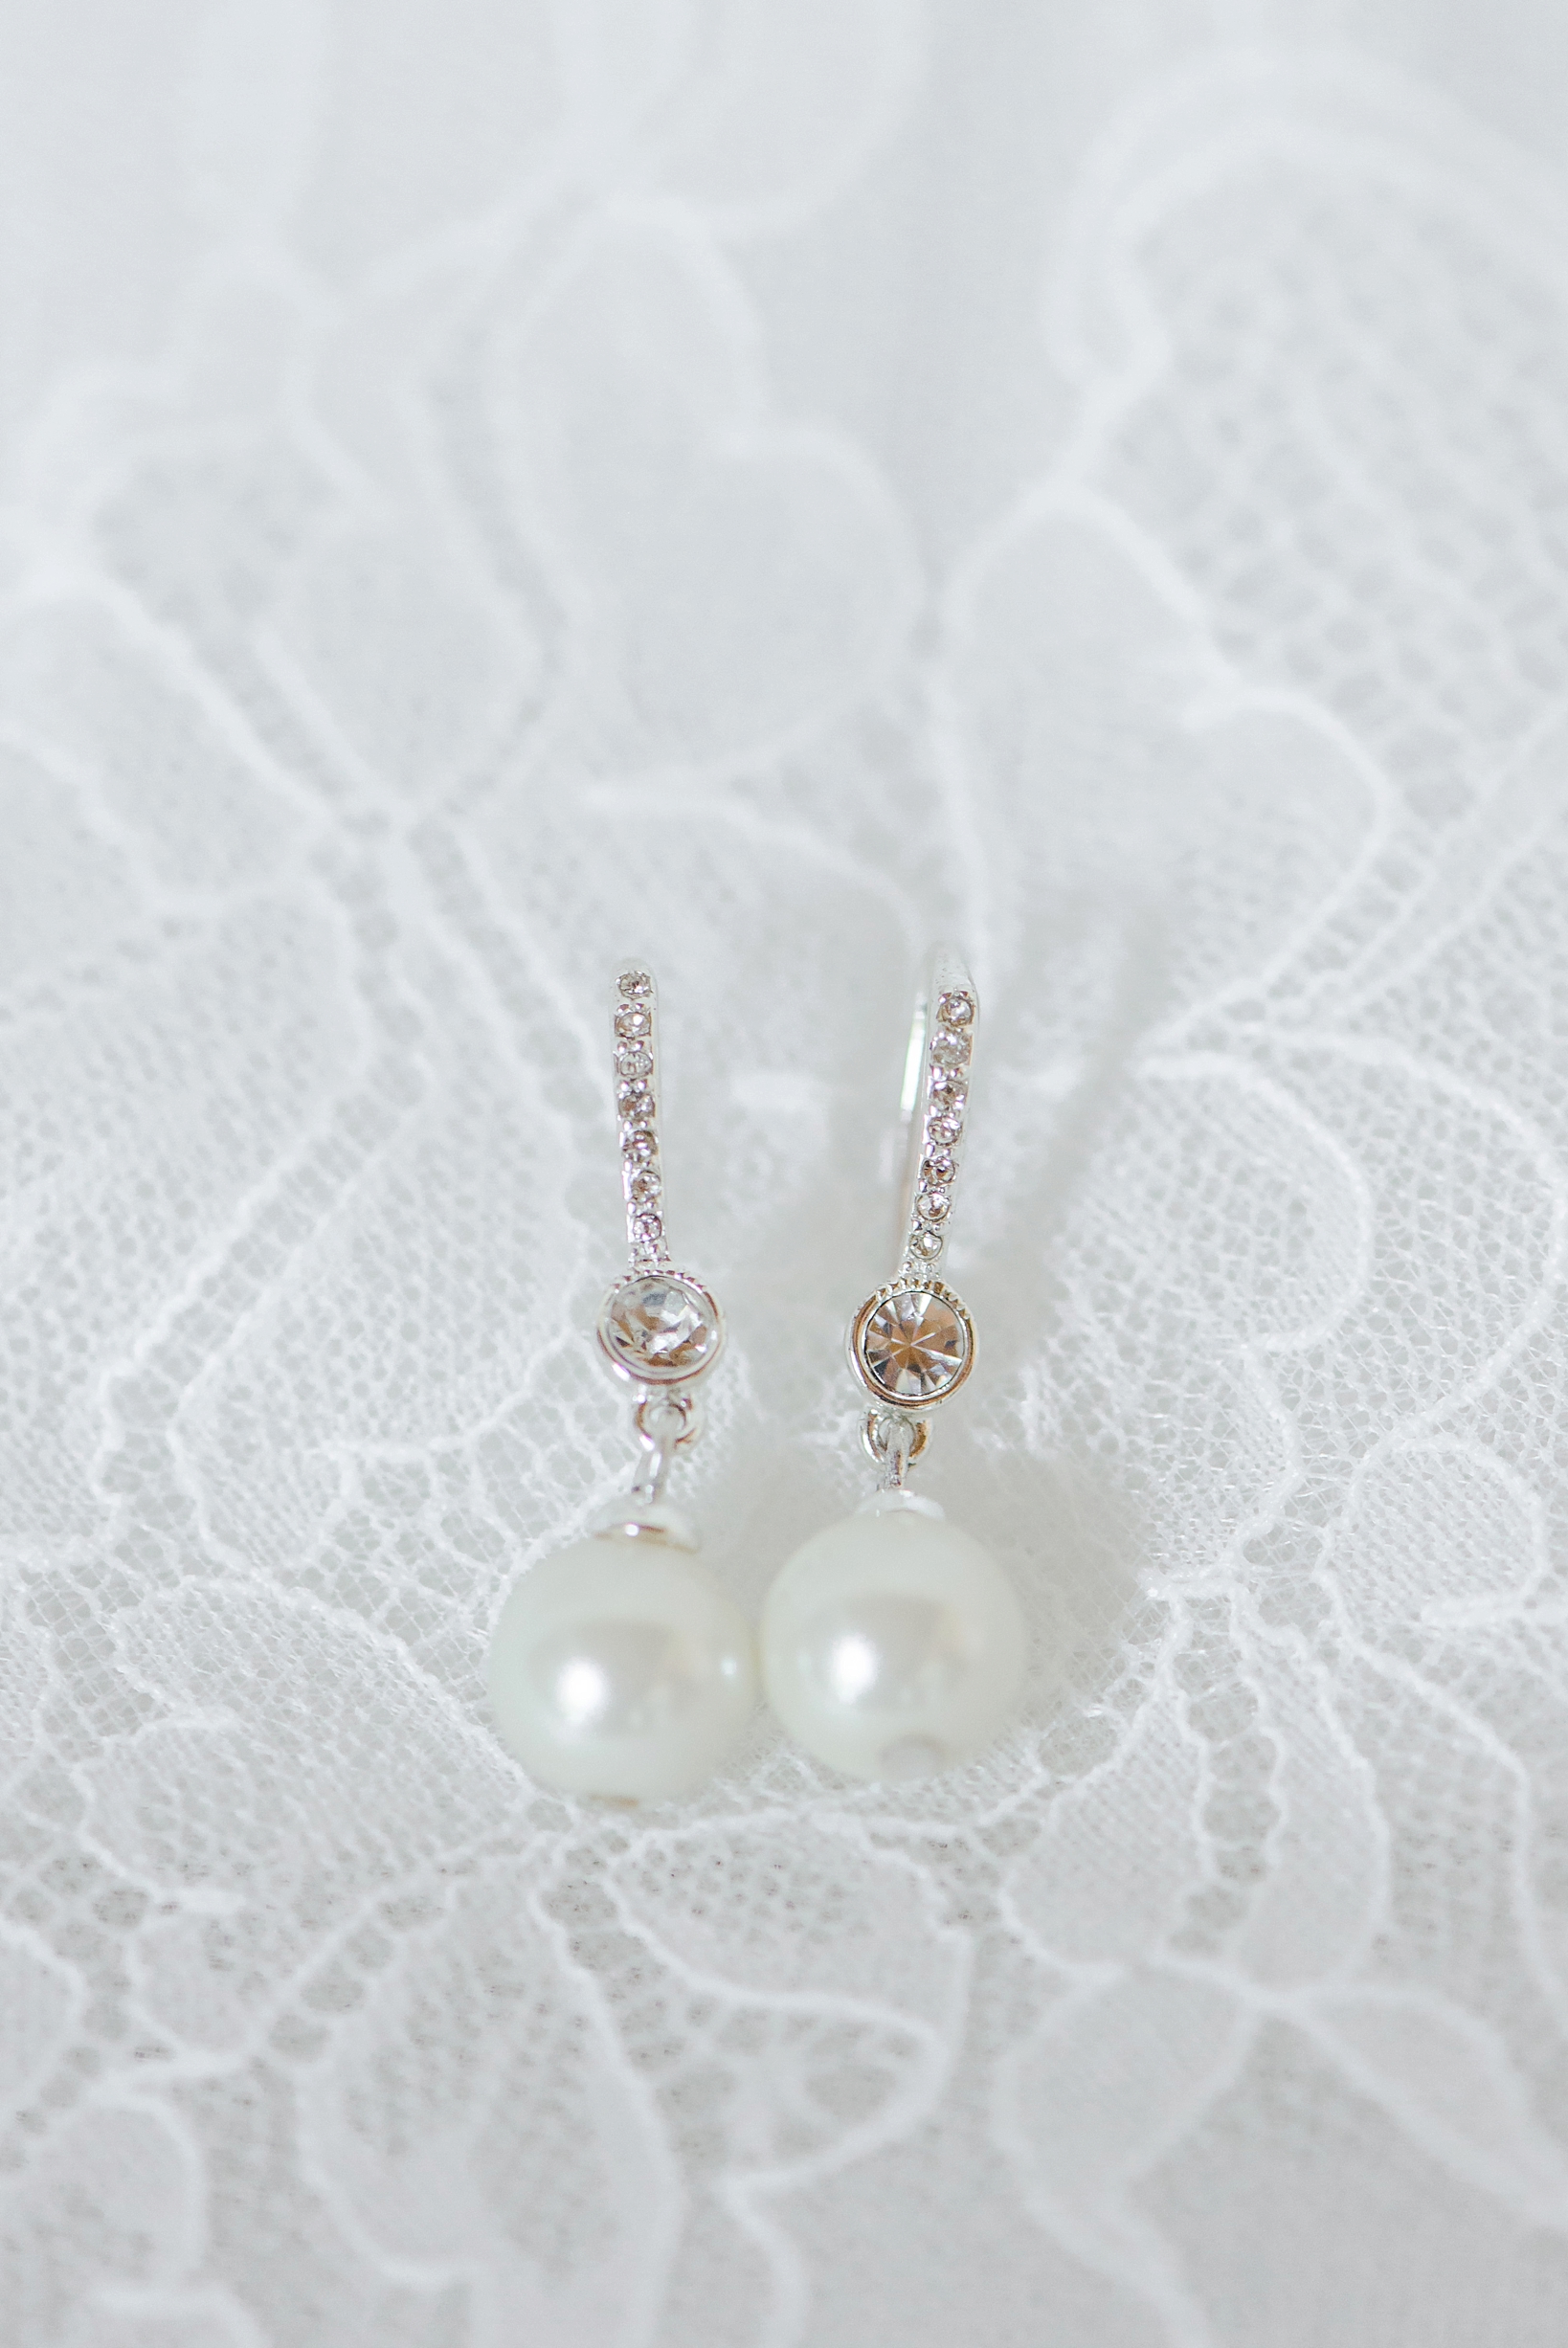 Bride's pearl earrings on white lace